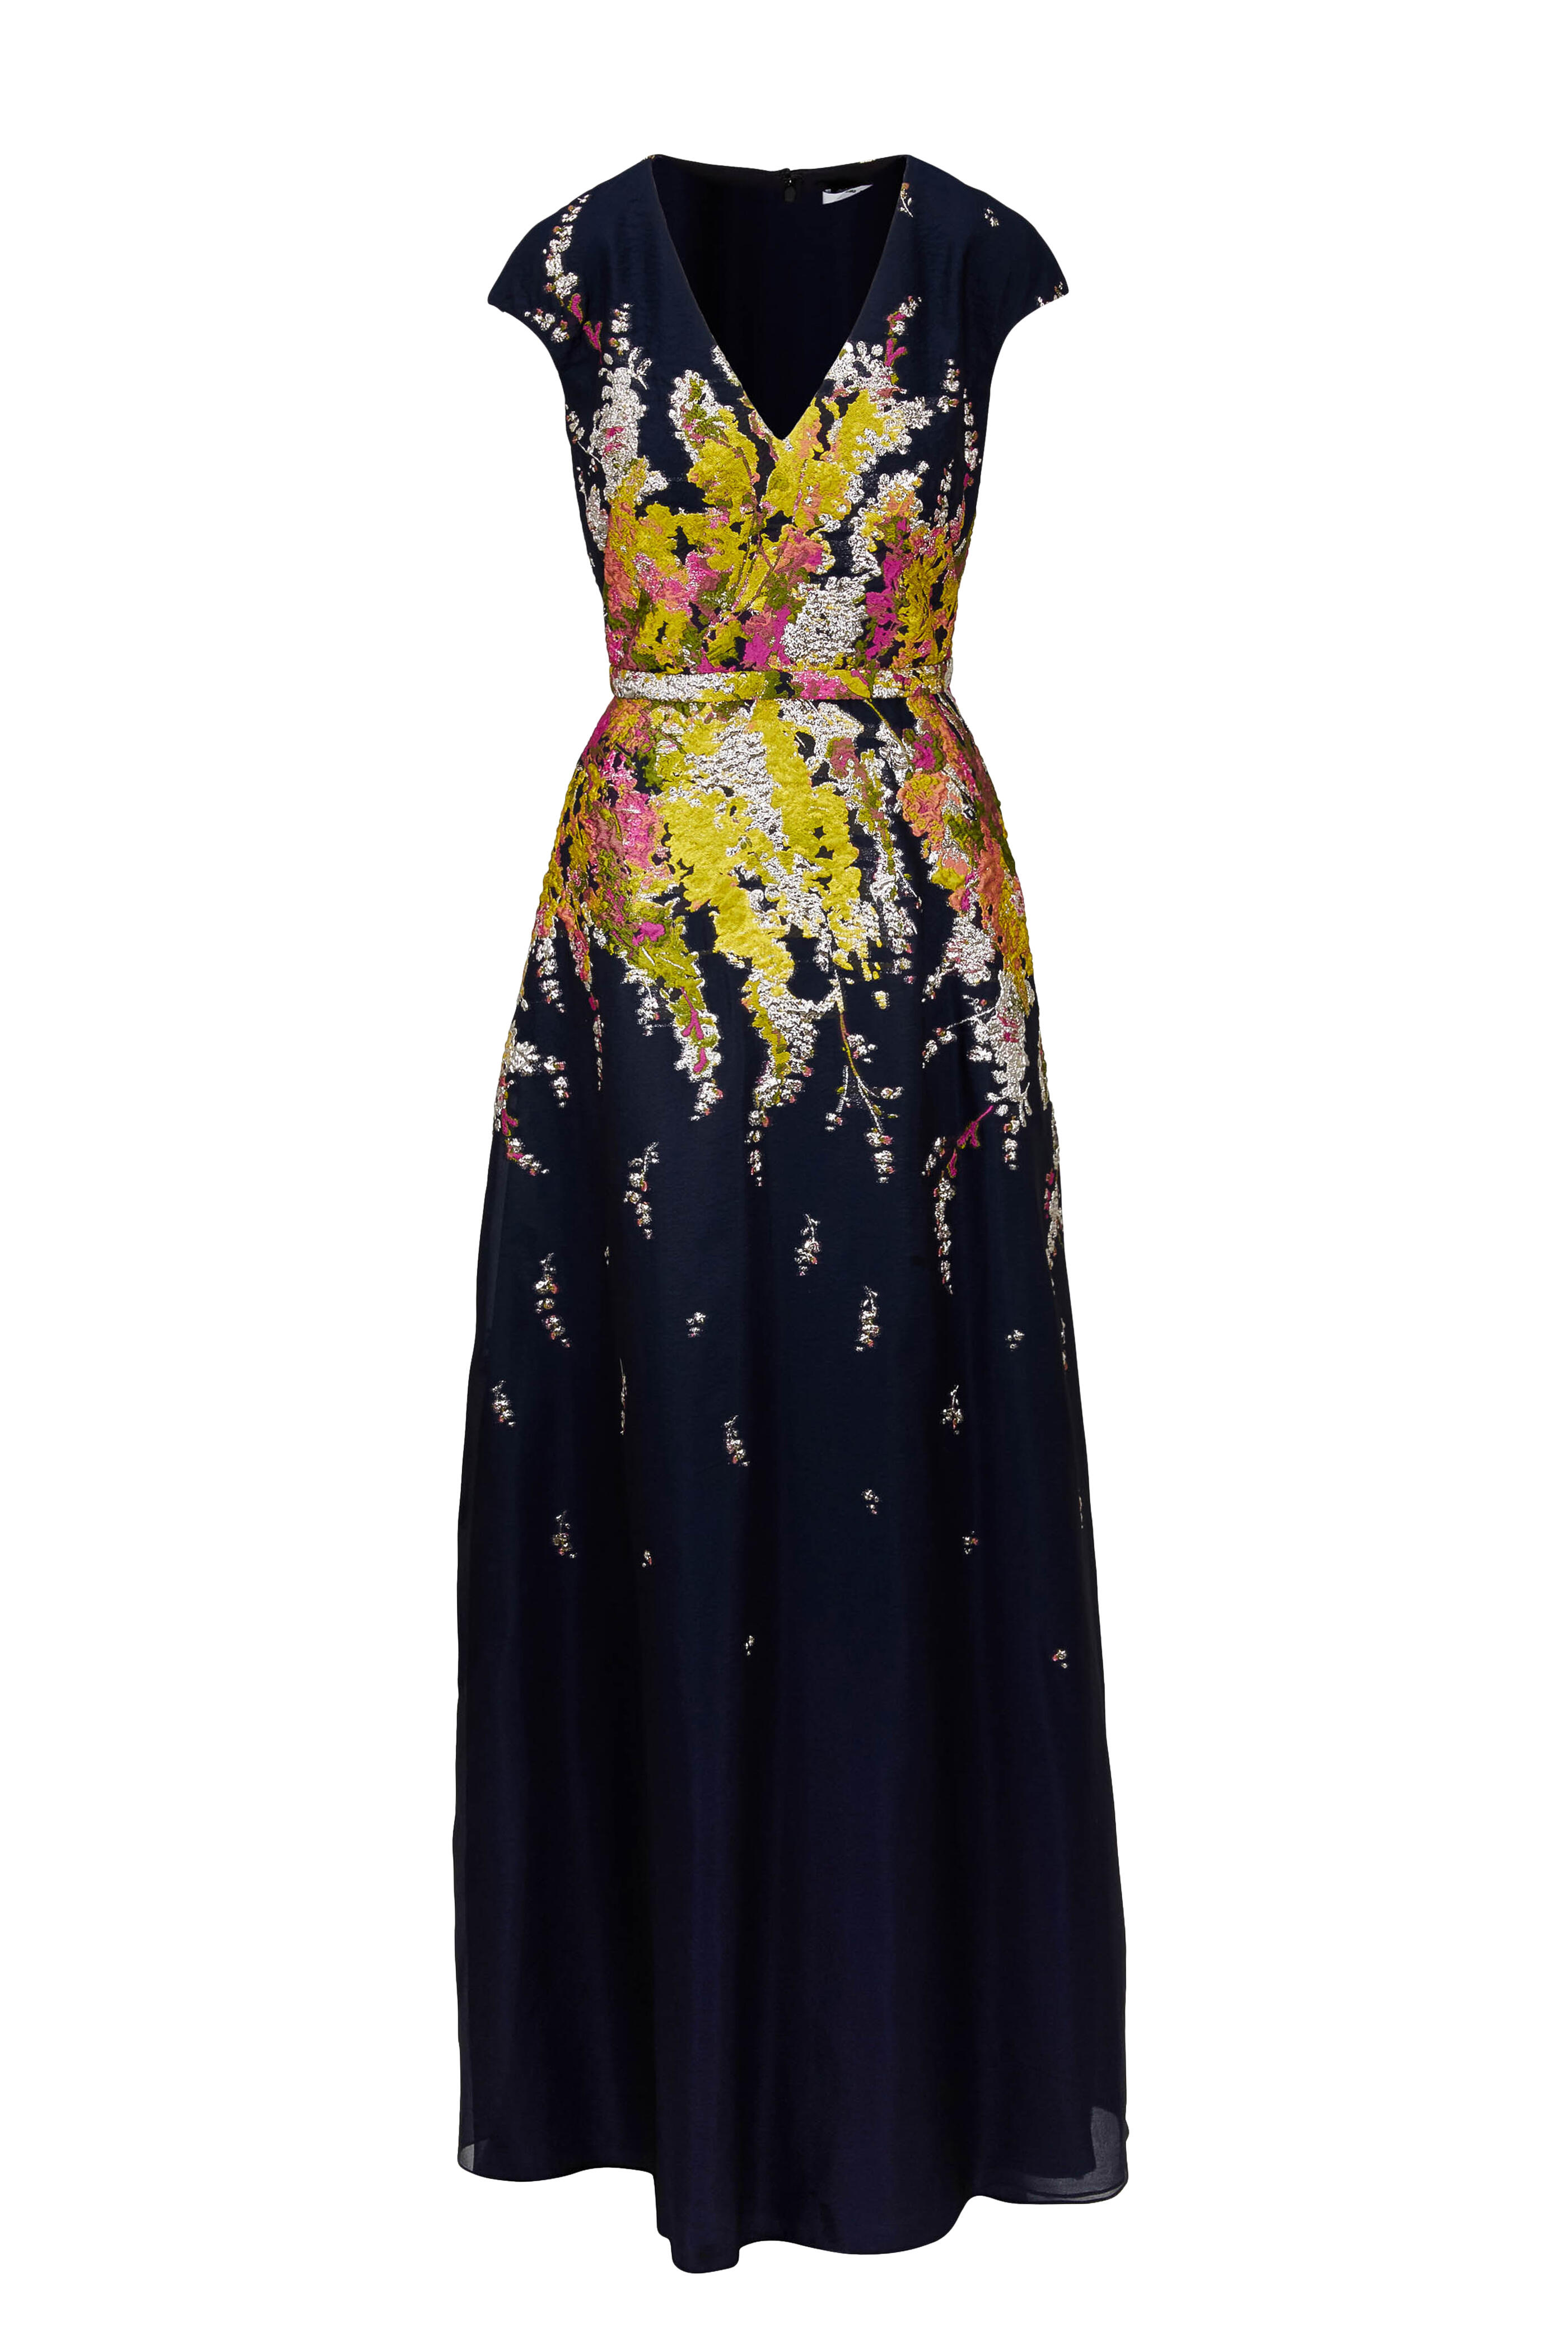 Pamella Roland - Navy Blue Floral Embroidered Cap Sleeve Gown